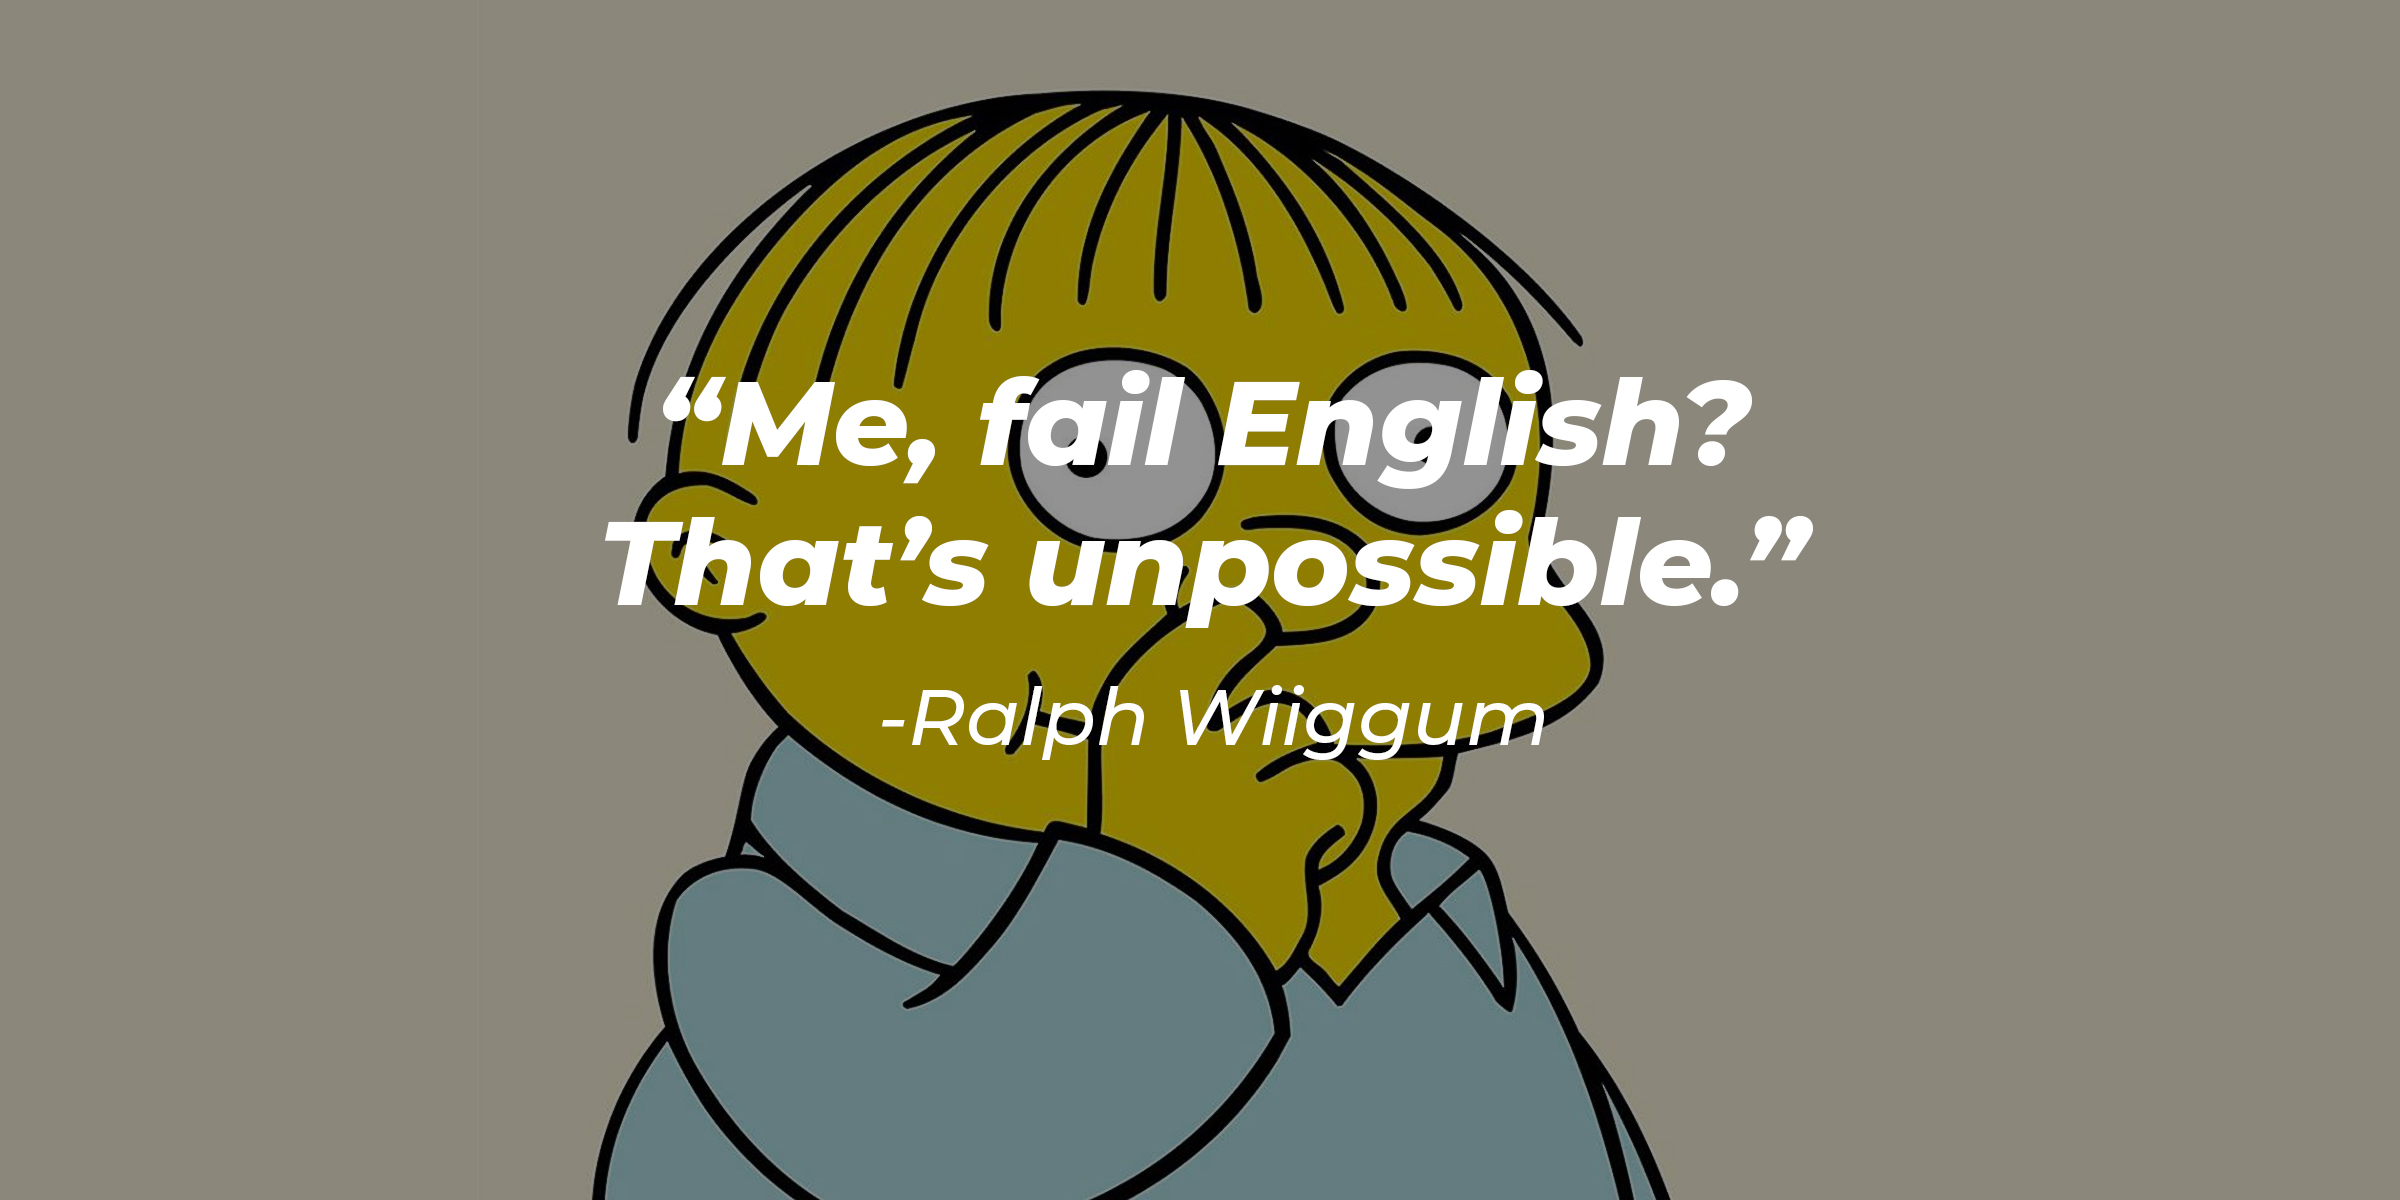 An image of Ralph Wiiggum, with his quote: “Me, fail English? That’s unpossible.” | Source: Facebook.com/TheSimpsons